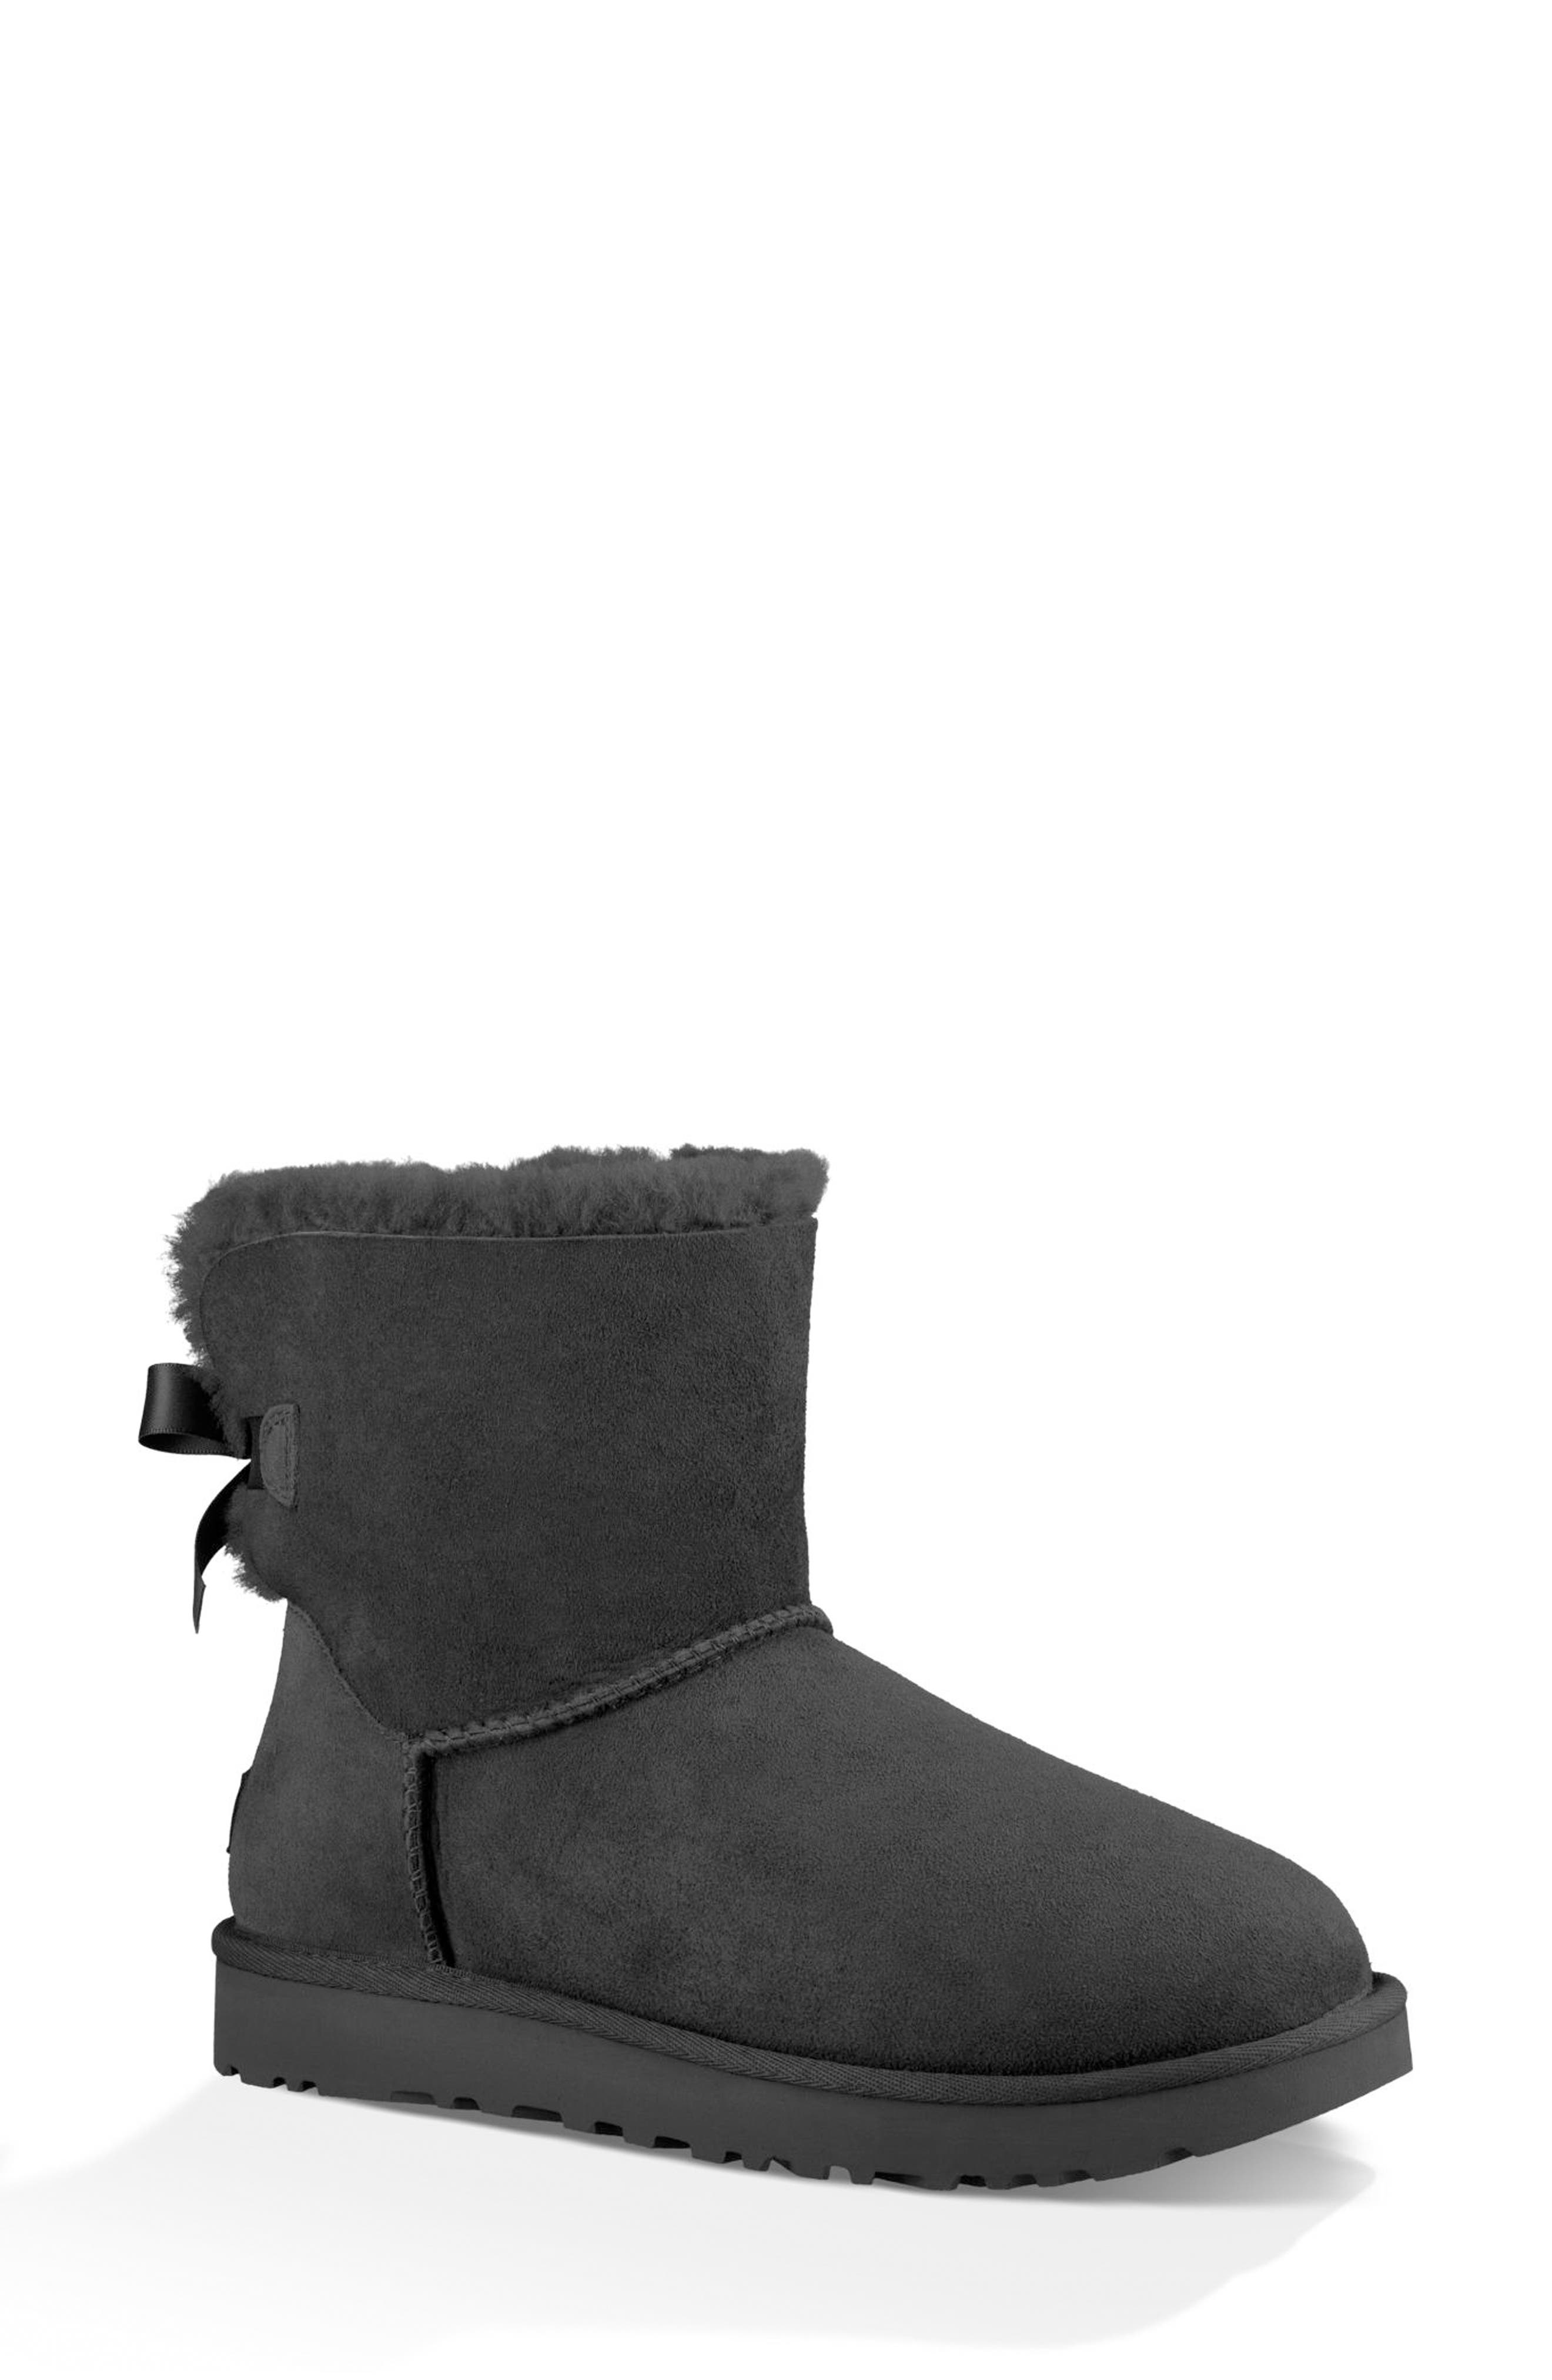 size w7 ugg boots